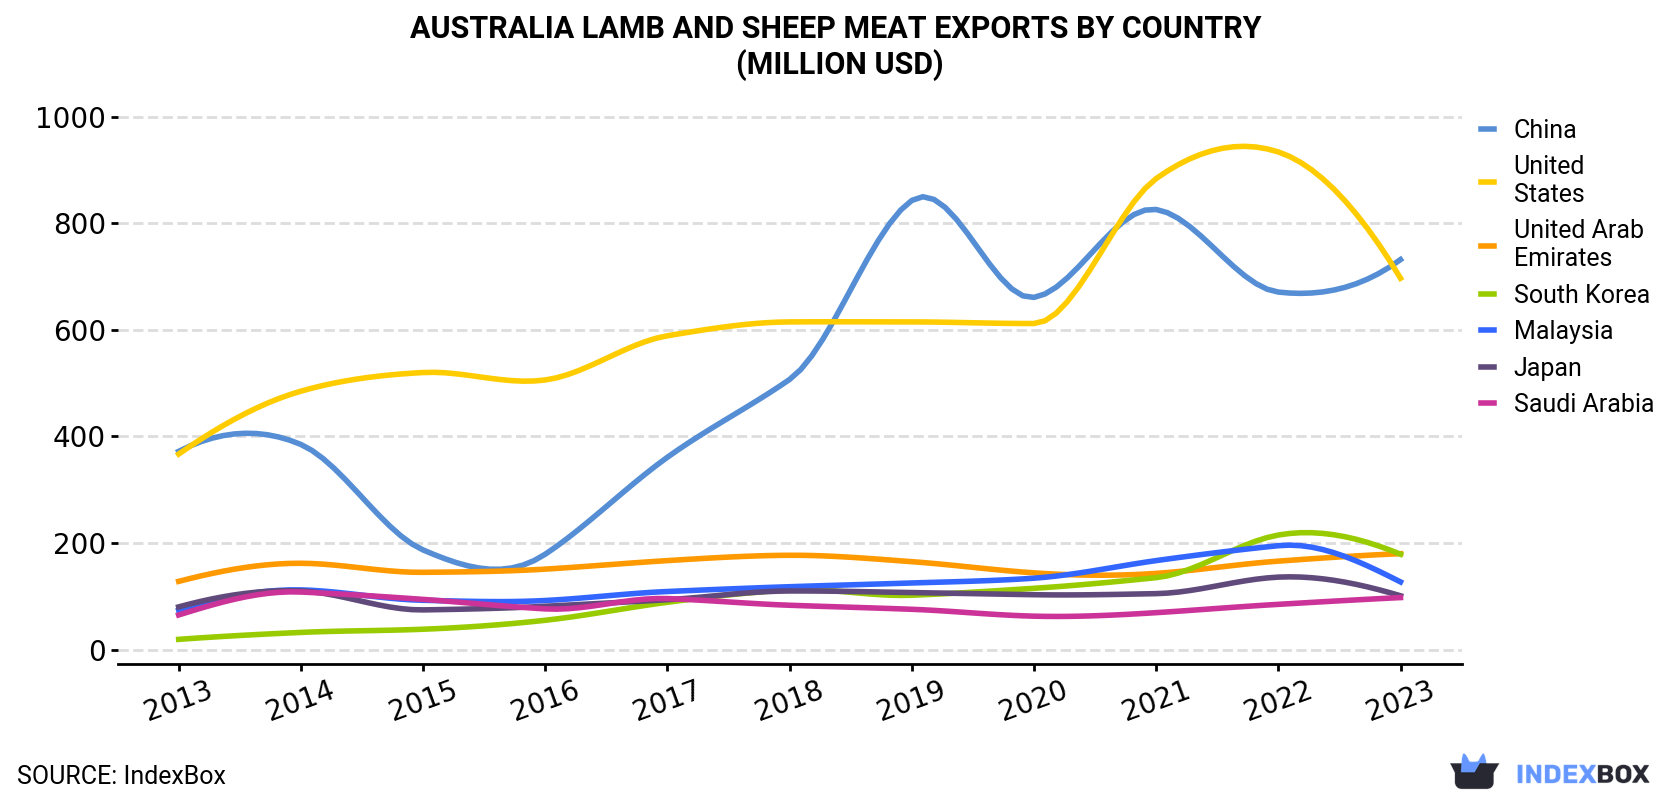 Australia Lamb and Sheep Meat Exports By Country (Million USD)